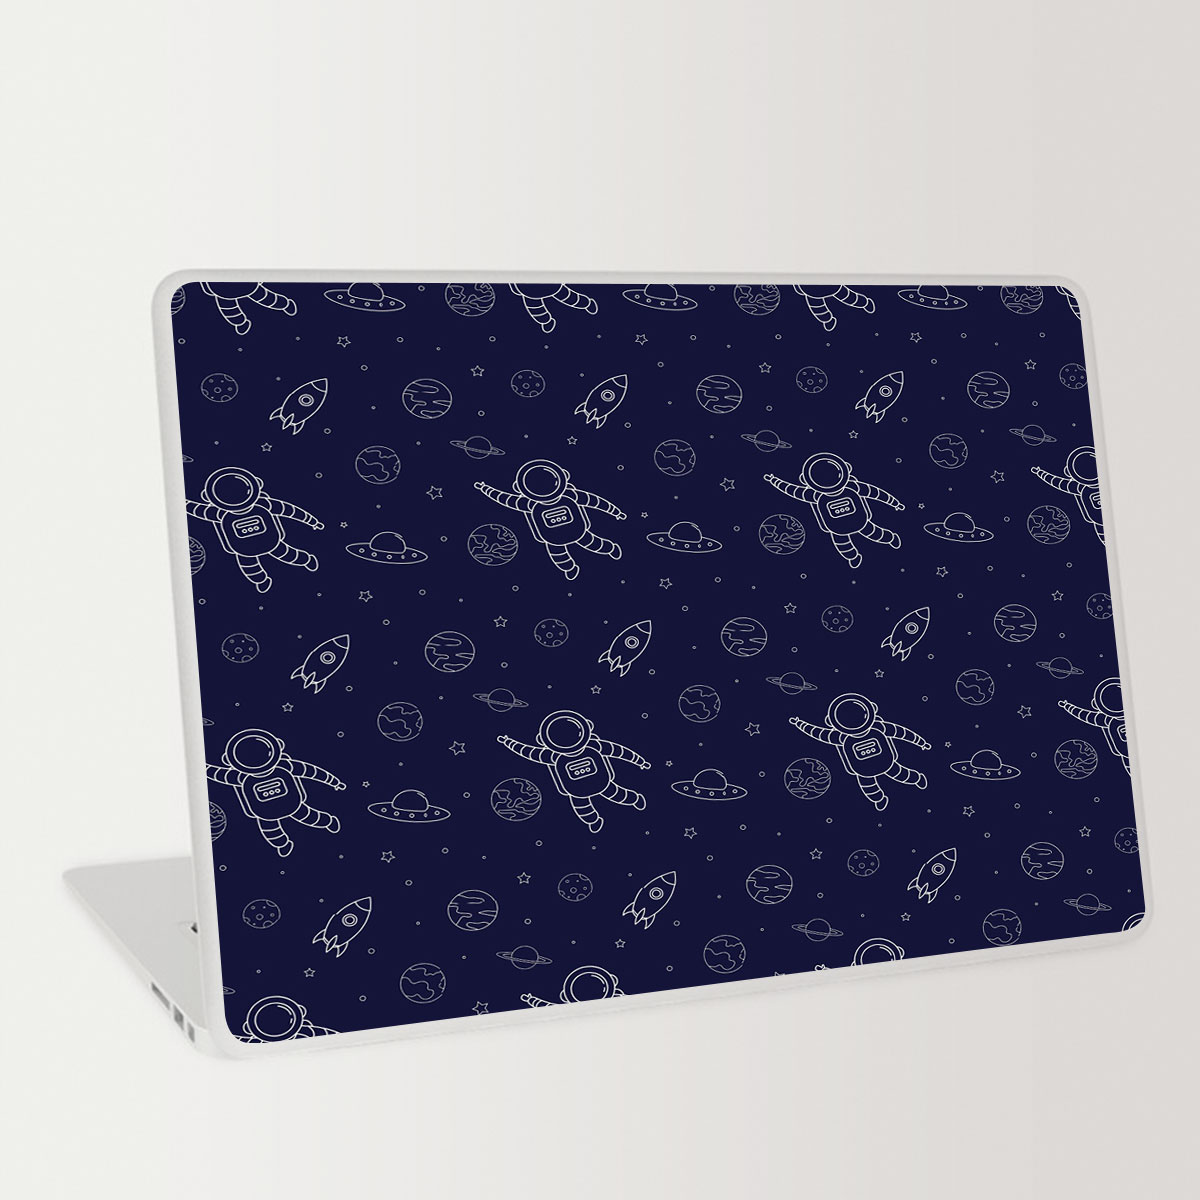 Astronaut And Outer Space Laptop Skin